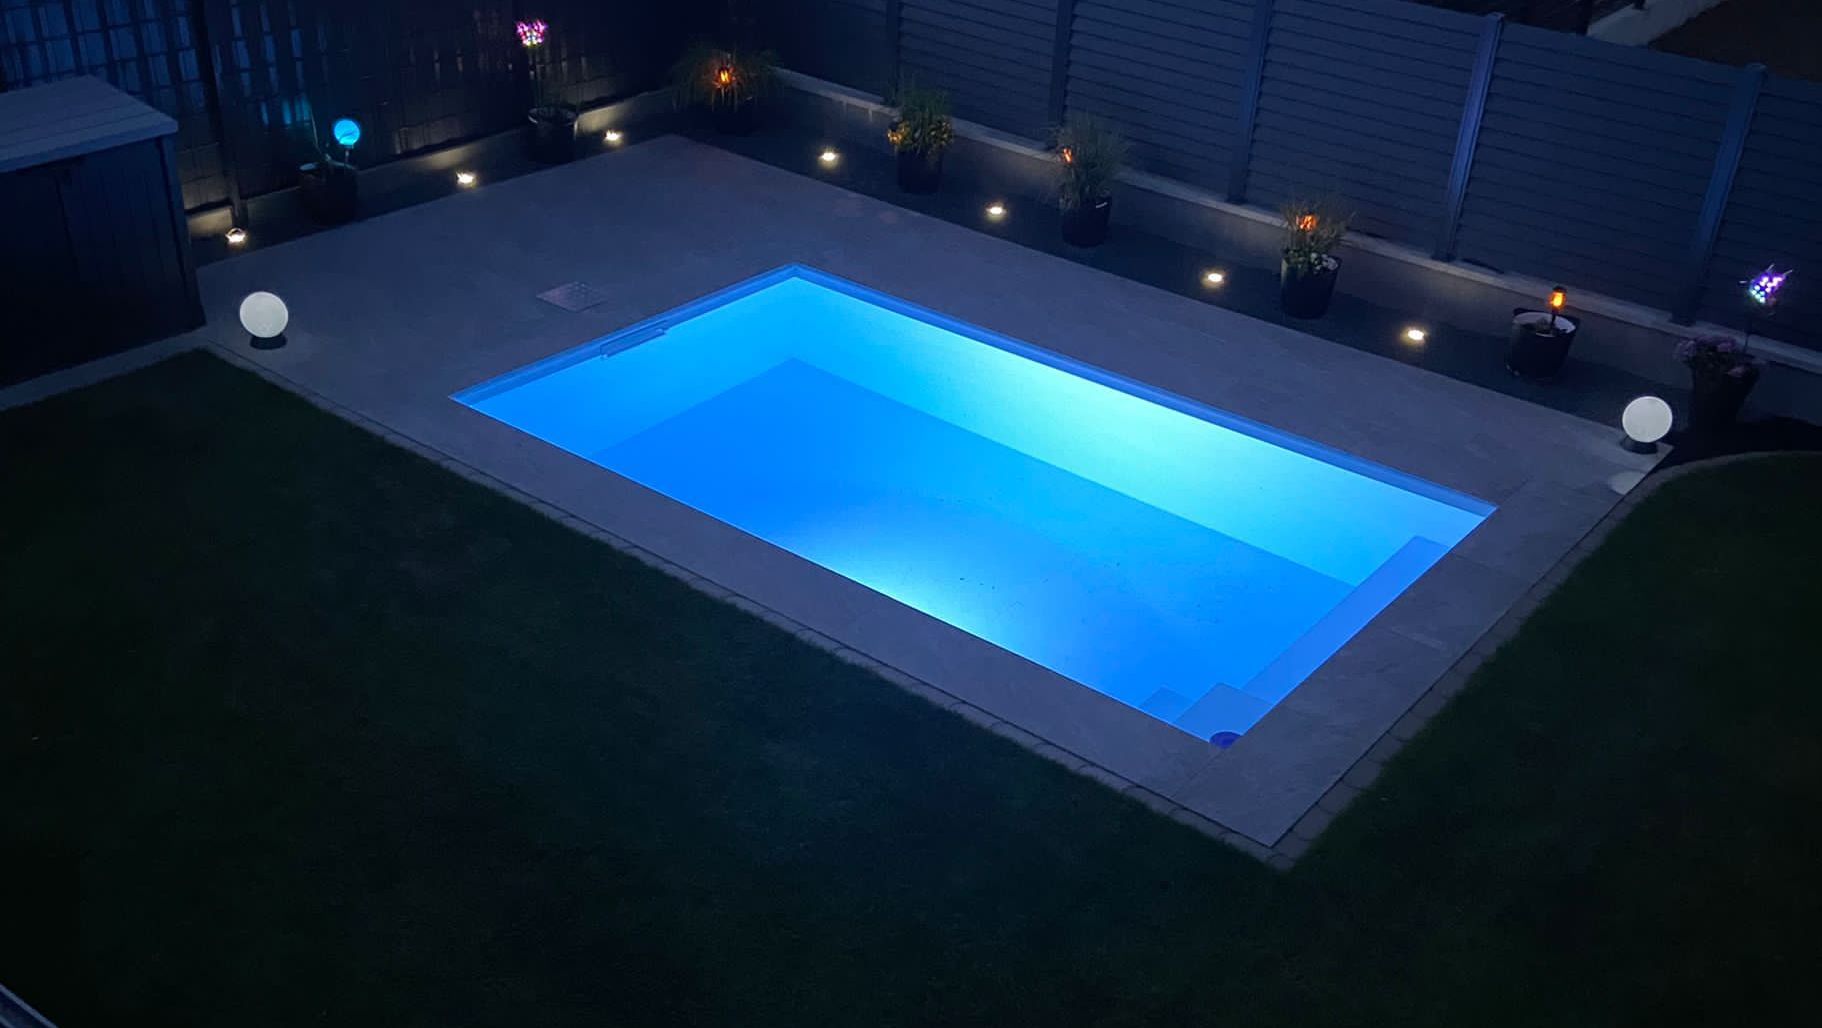 Pool mit Beleuchtung